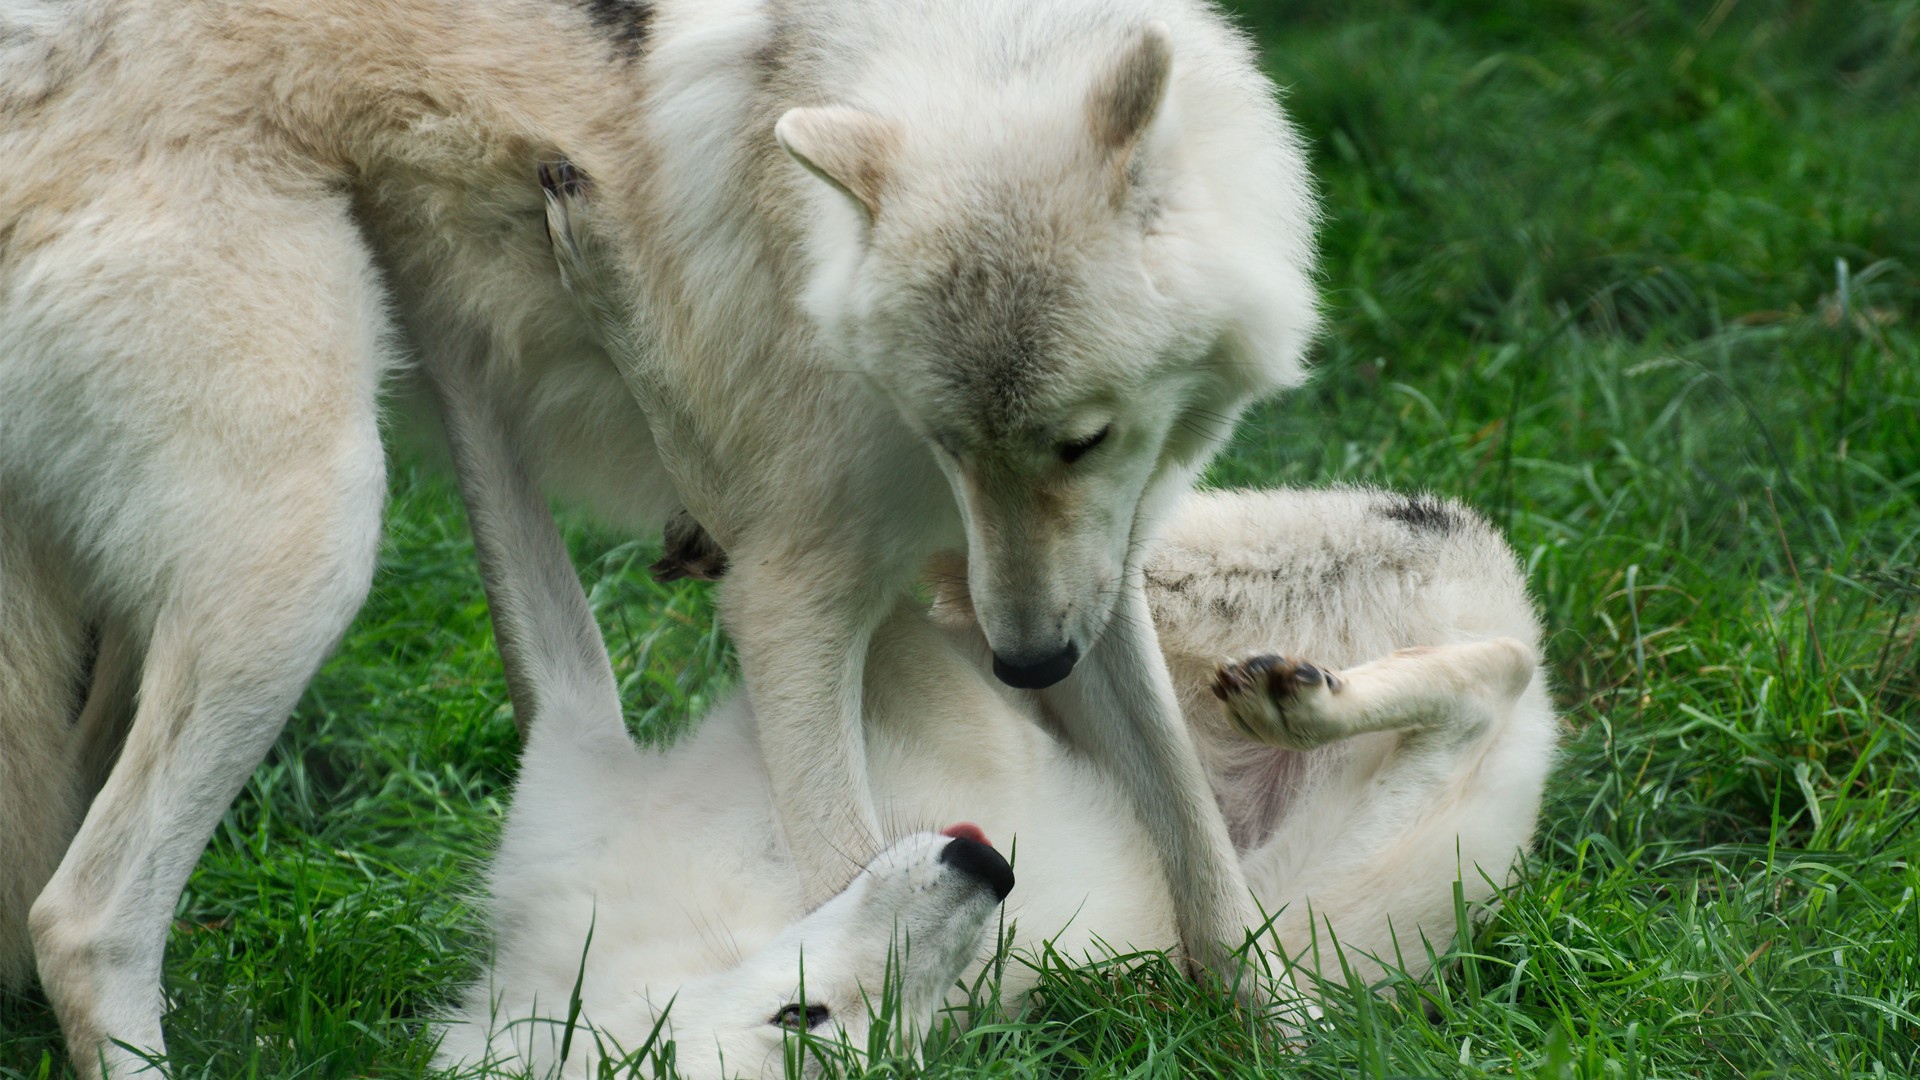 Wolves play on grass